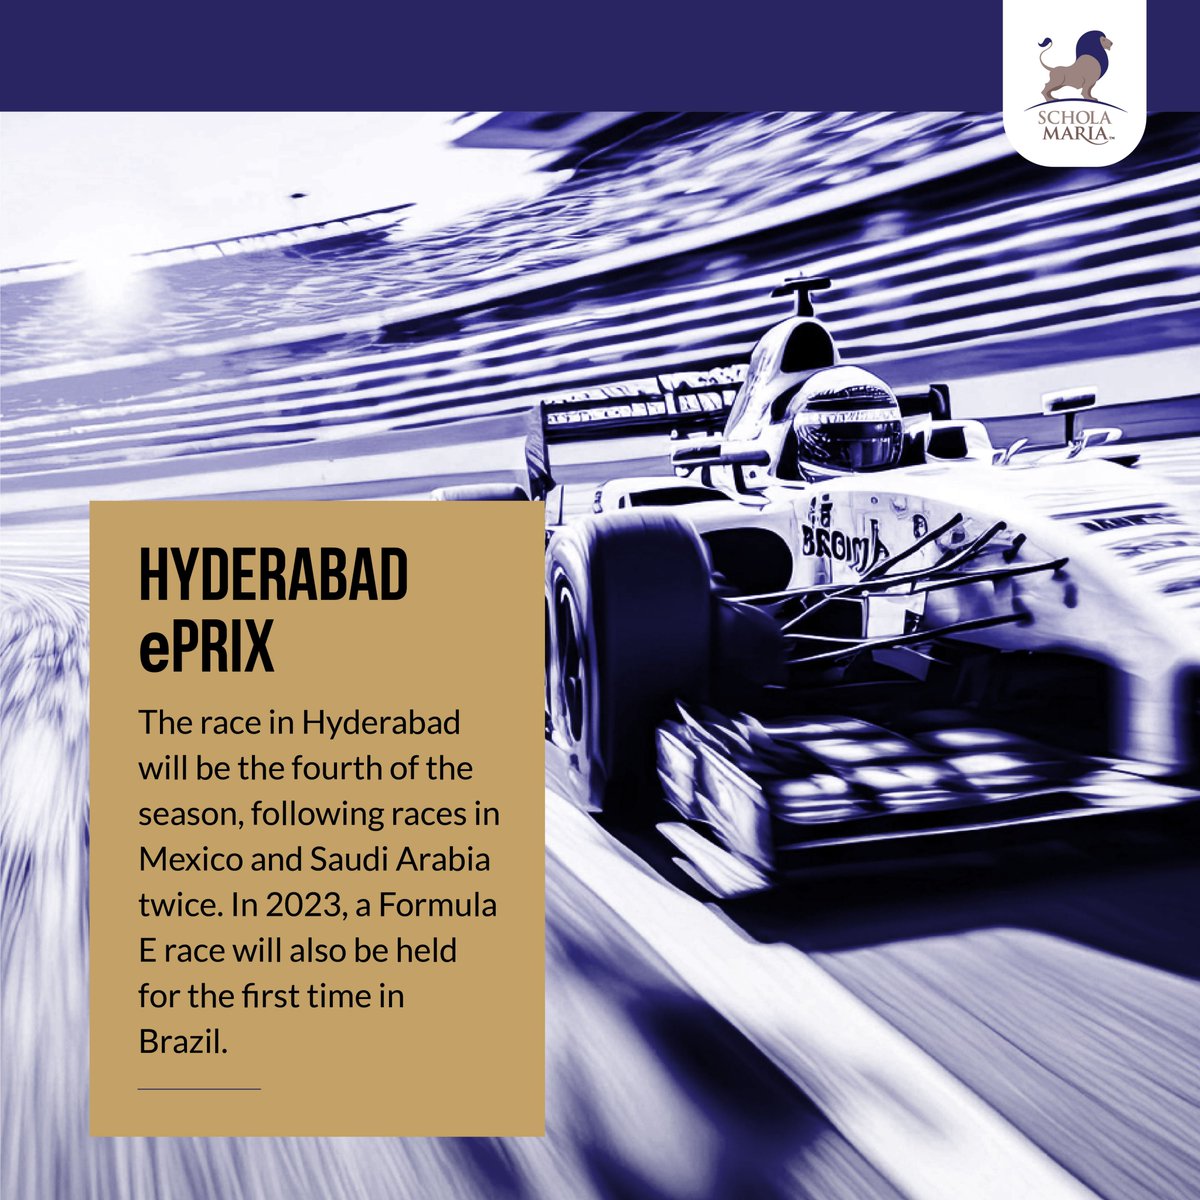 India will be hosting its very first Formula E race on February 11, 2023. 
#FormulaE #MotorRacing #SportsSchool #ScholaMaria